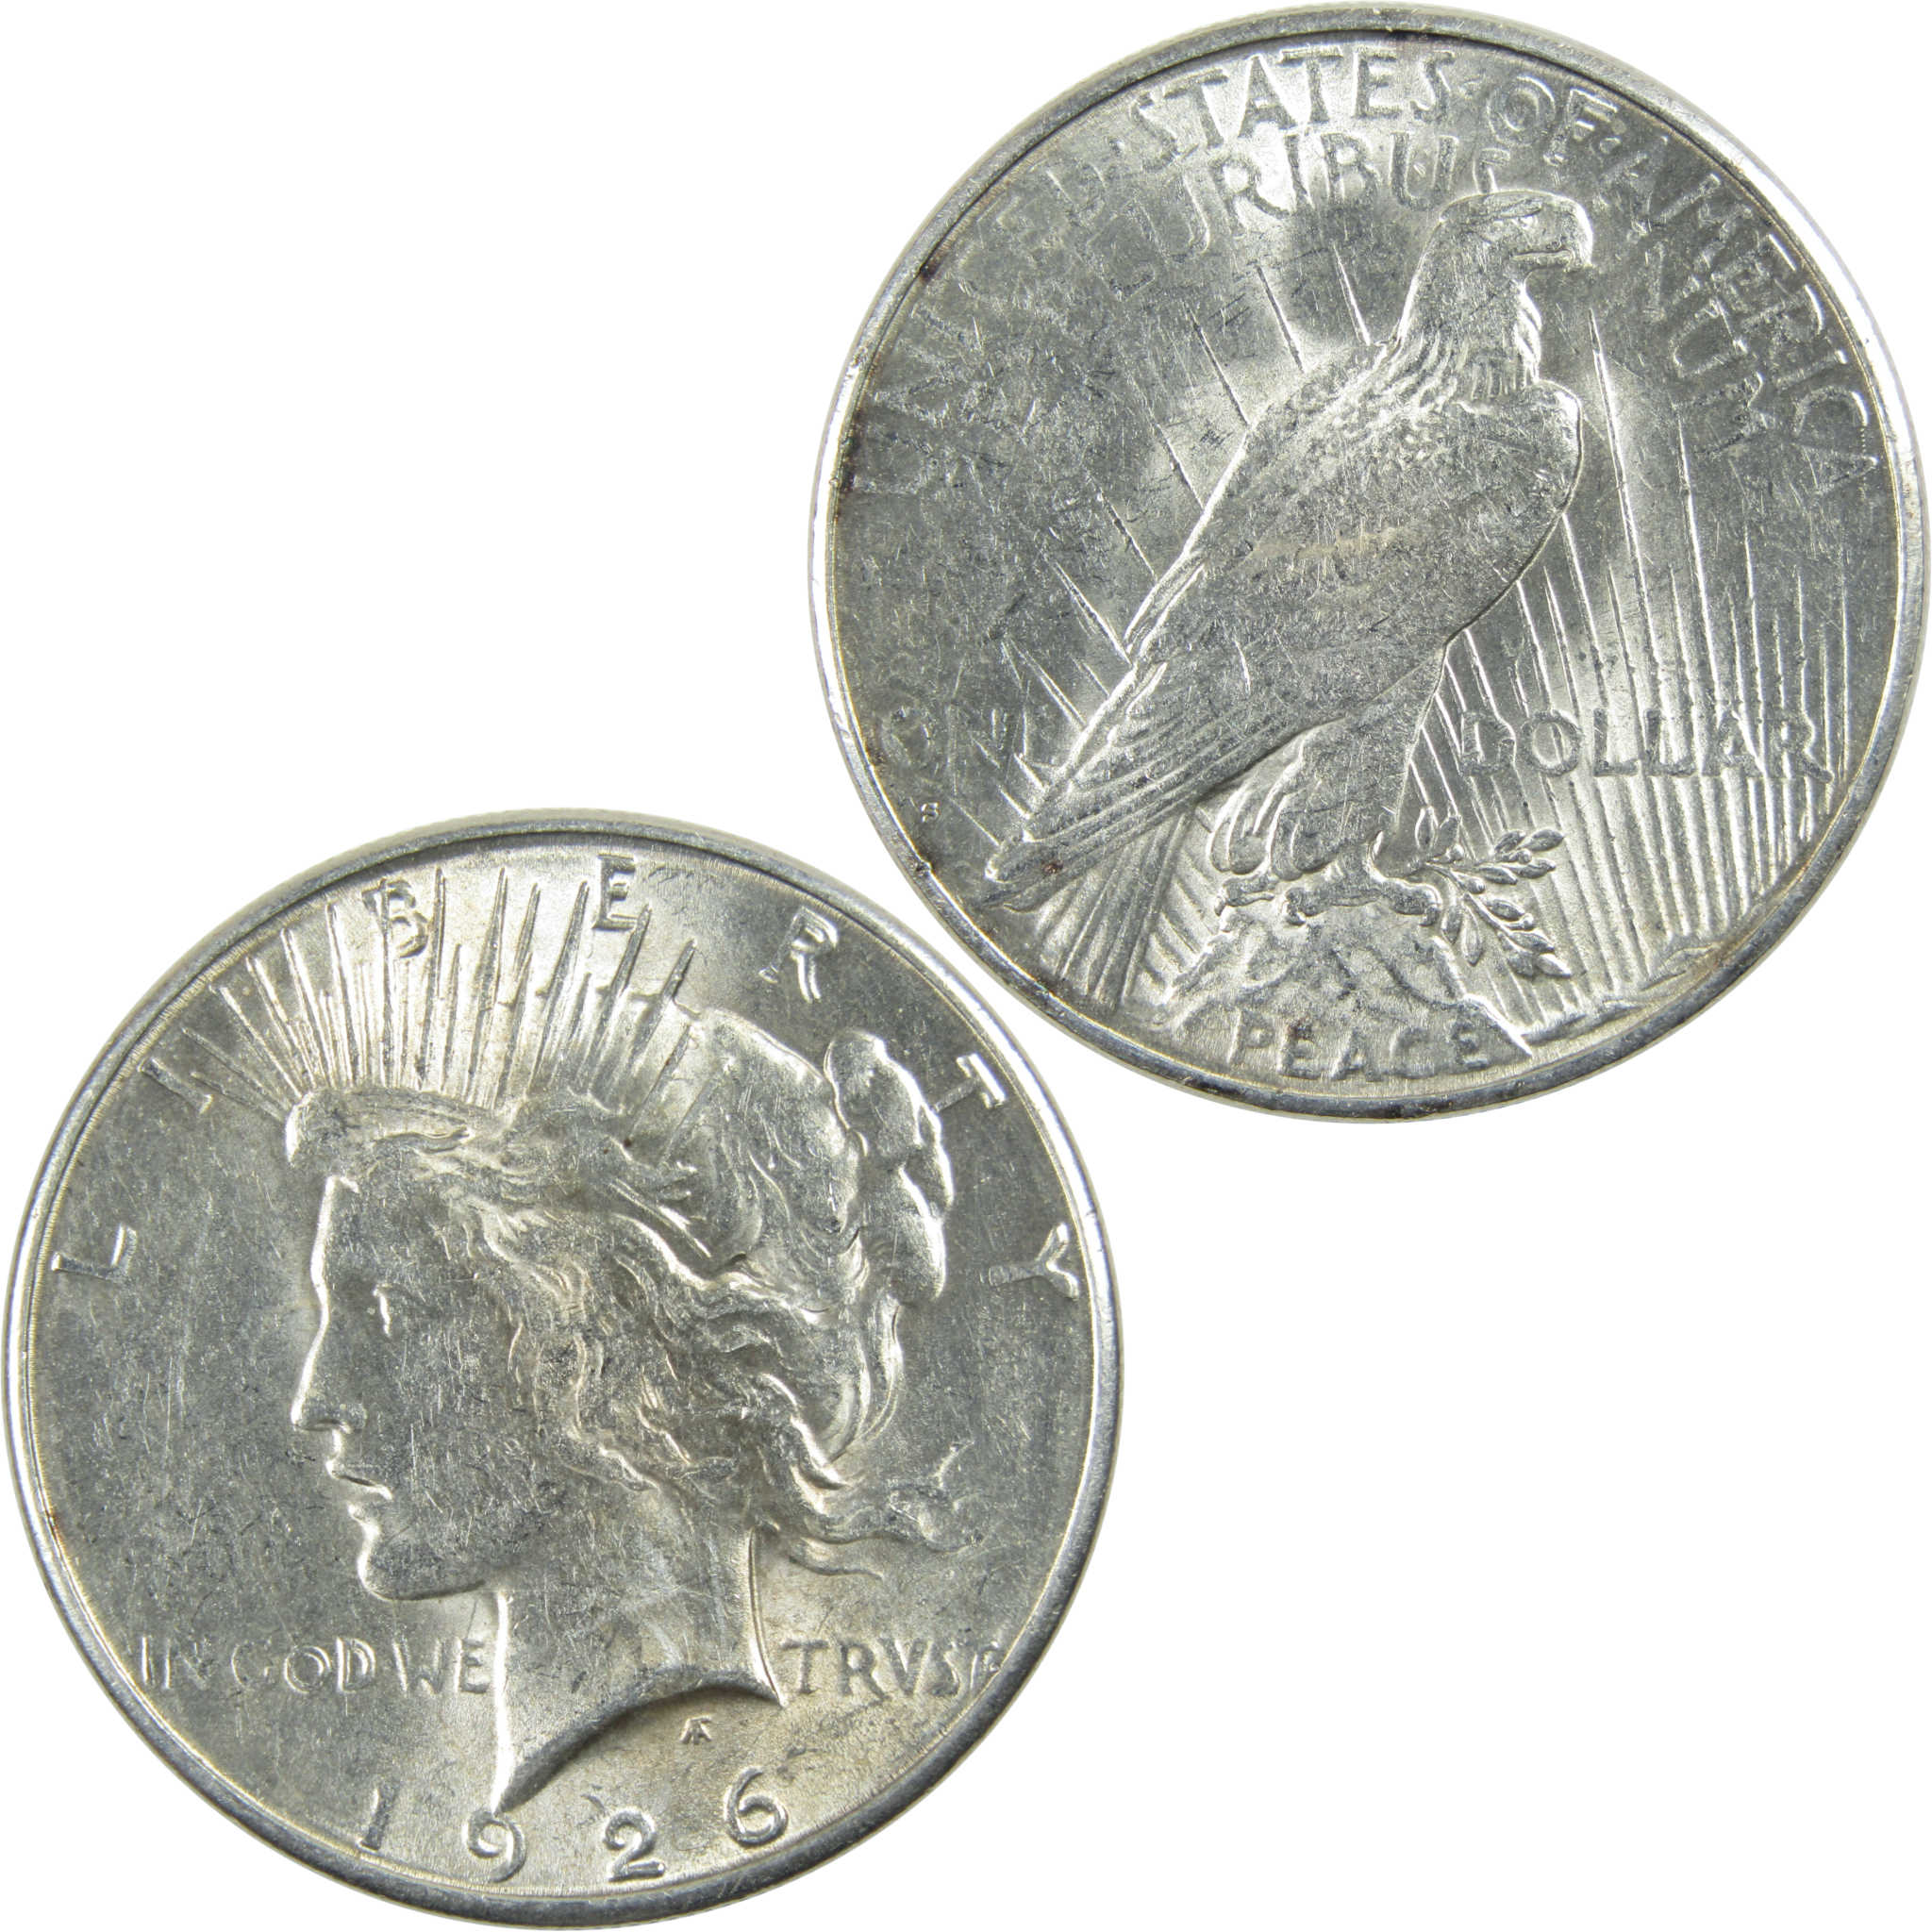 1926 S Peace Dollar AU About Uncirculated Silver $1 Coin SKU:I12840